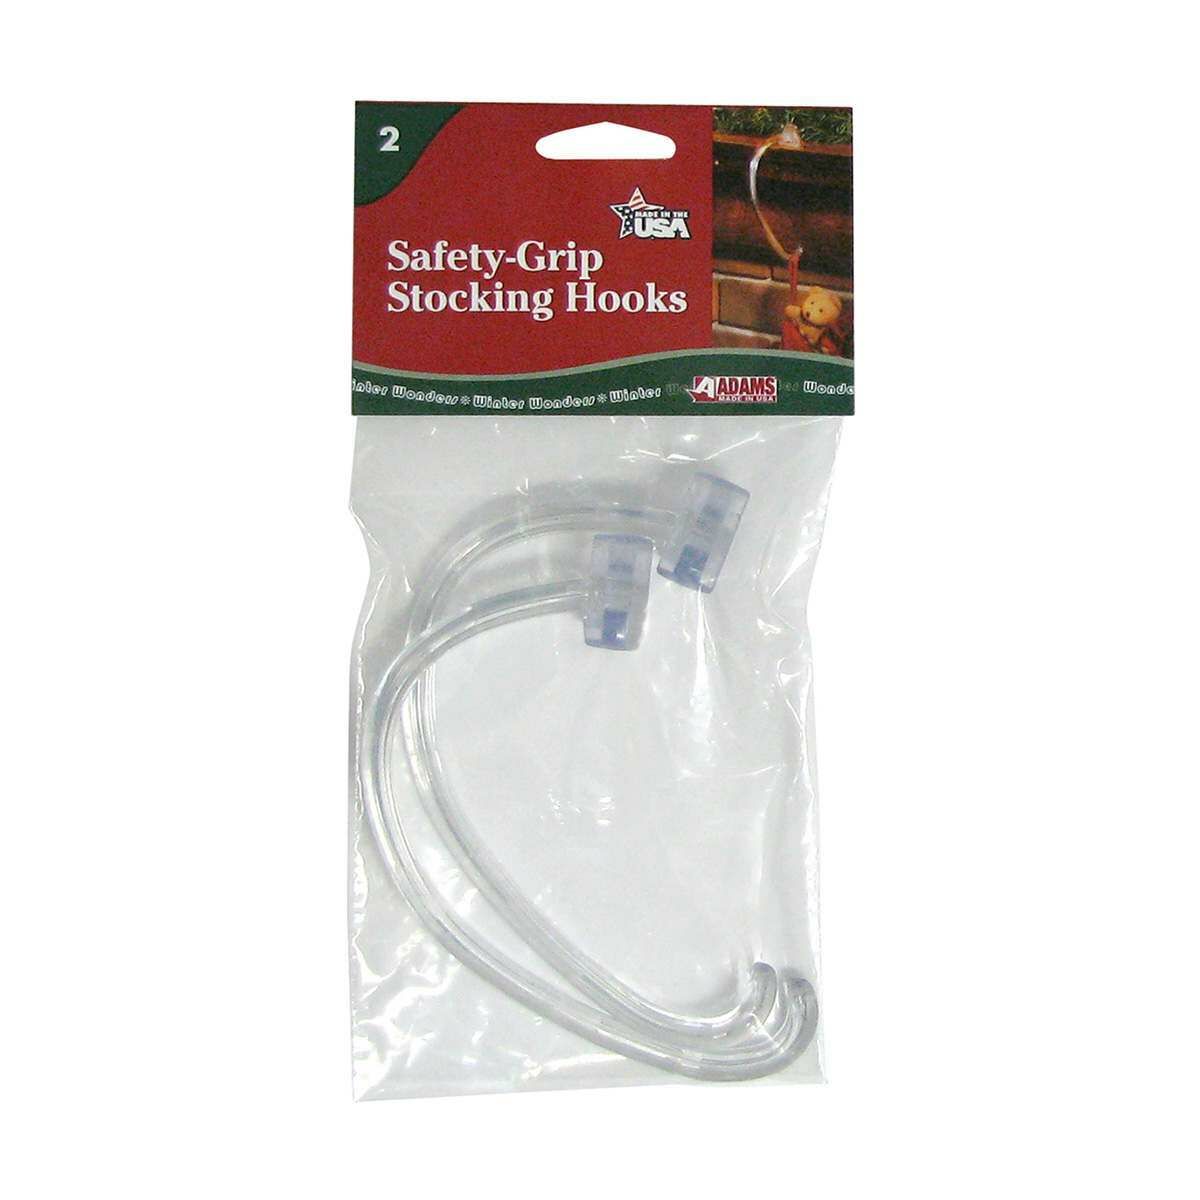 Safety Grip Stocking Holders image 2